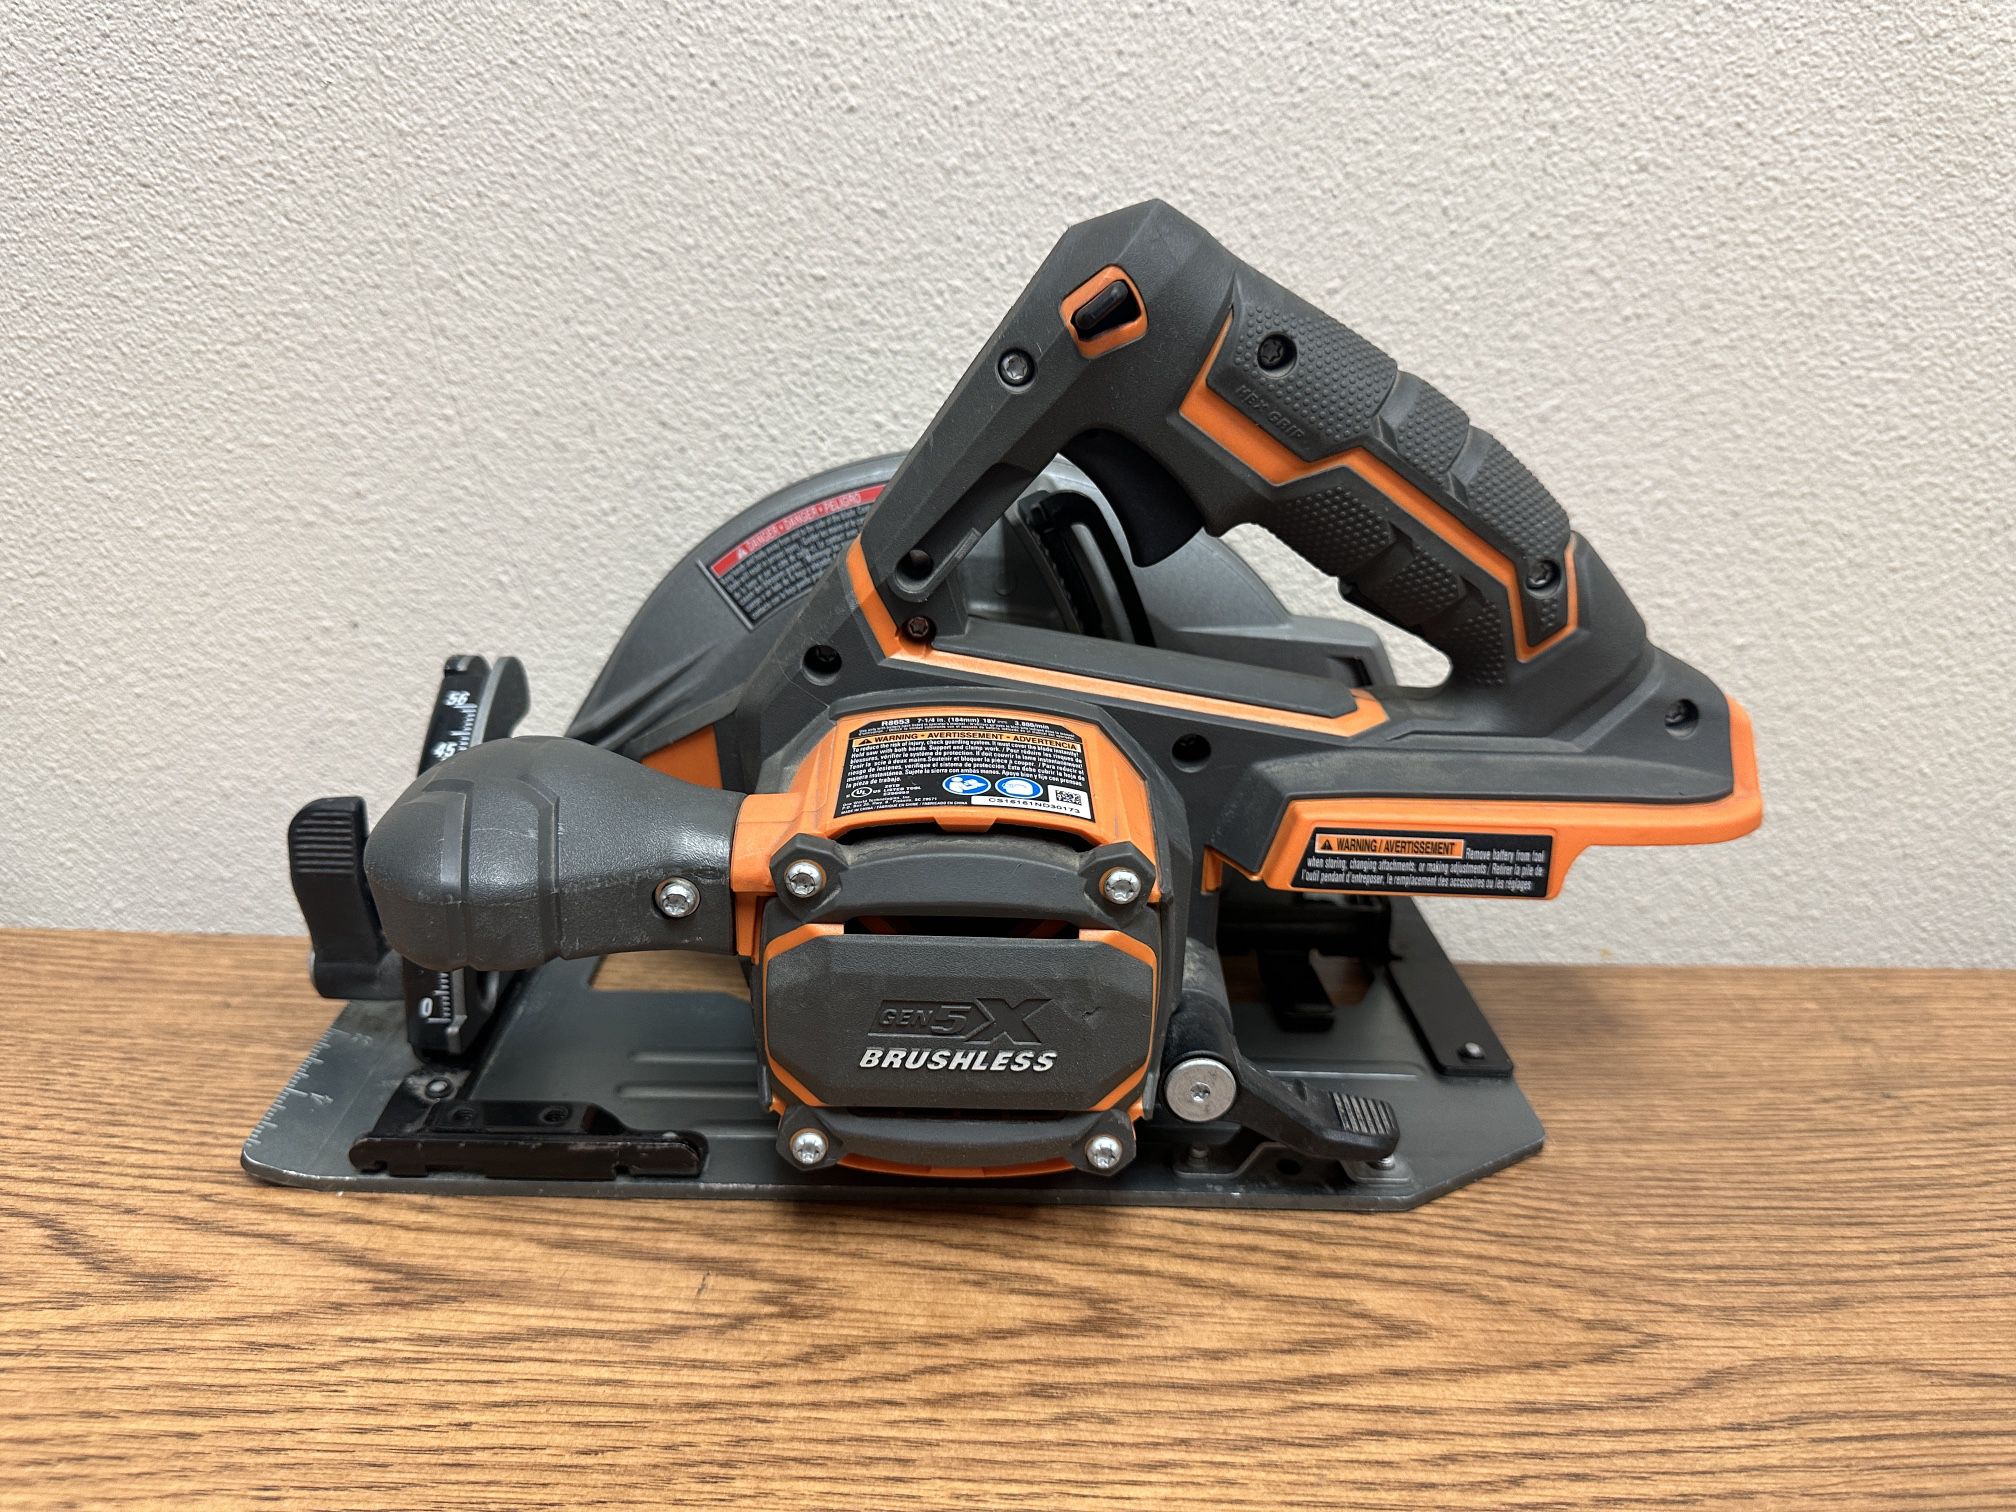 Ridgid R8653 Gen5X Brushless 18V Lithium Ion Cordless 1/4 Circular Saw  (Tool Only) for Sale in Lincoln Acres, CA OfferUp